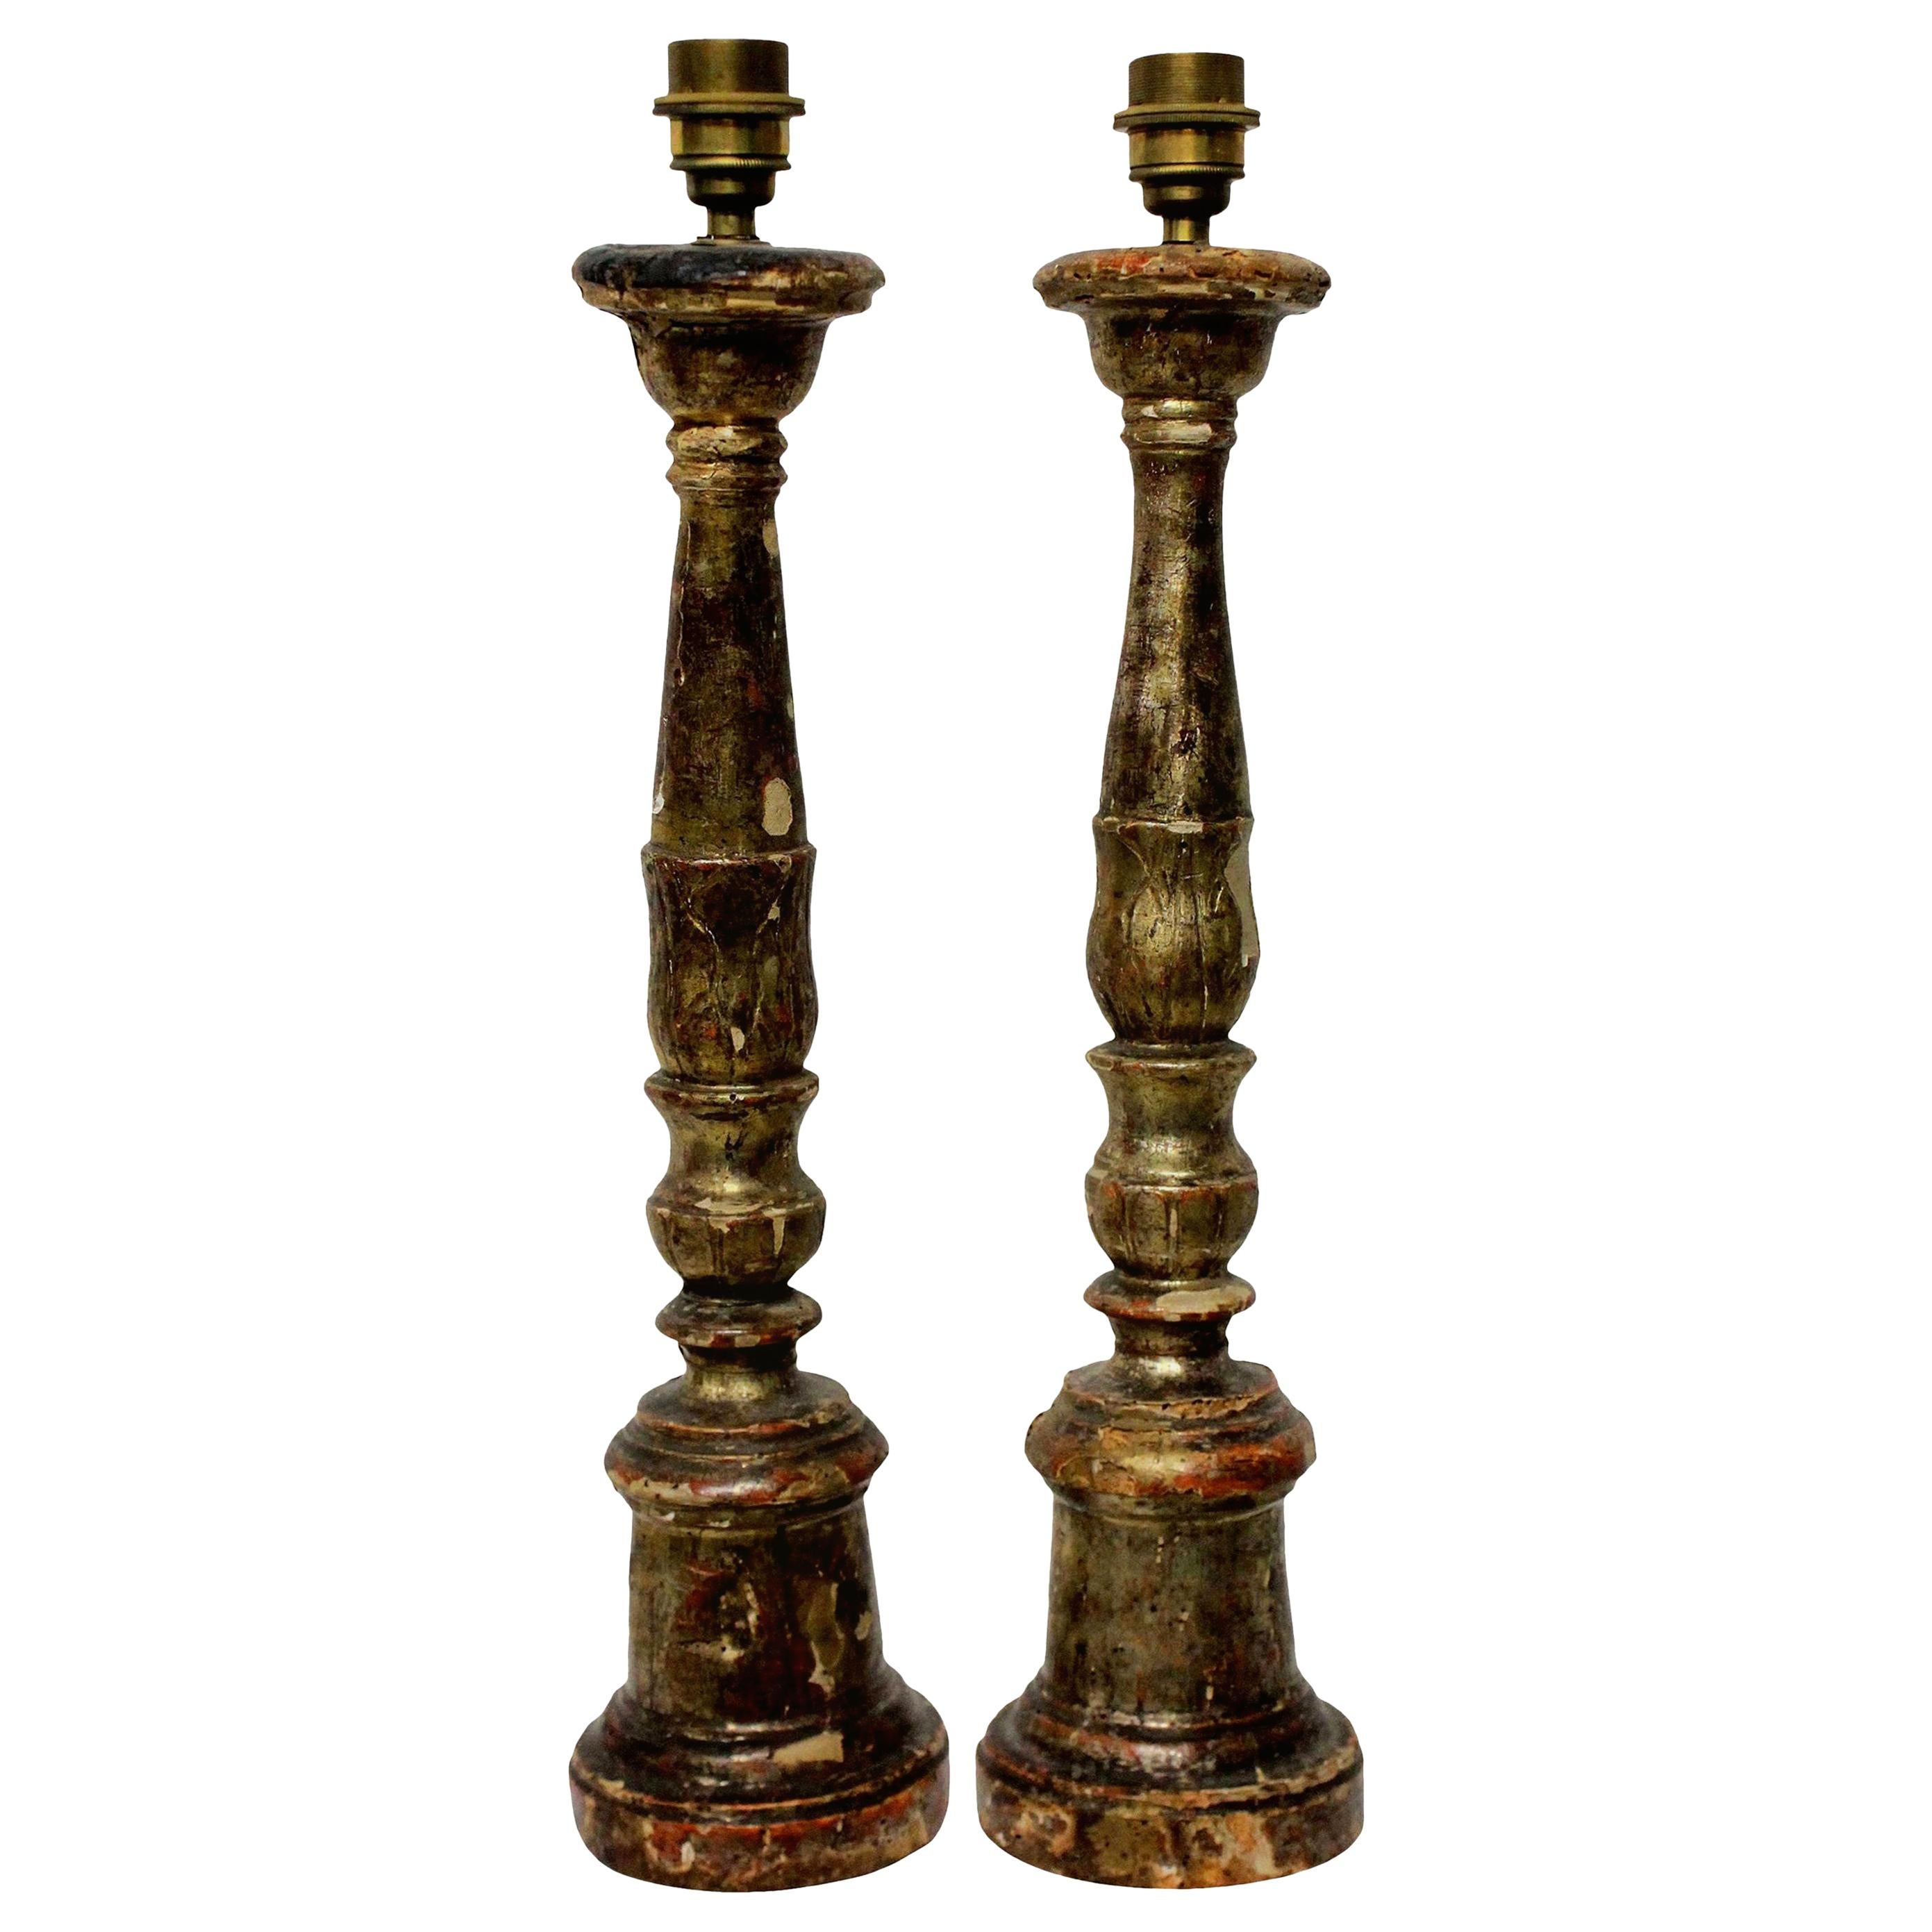 Pair of 18th Century Silver Leaf Lamps